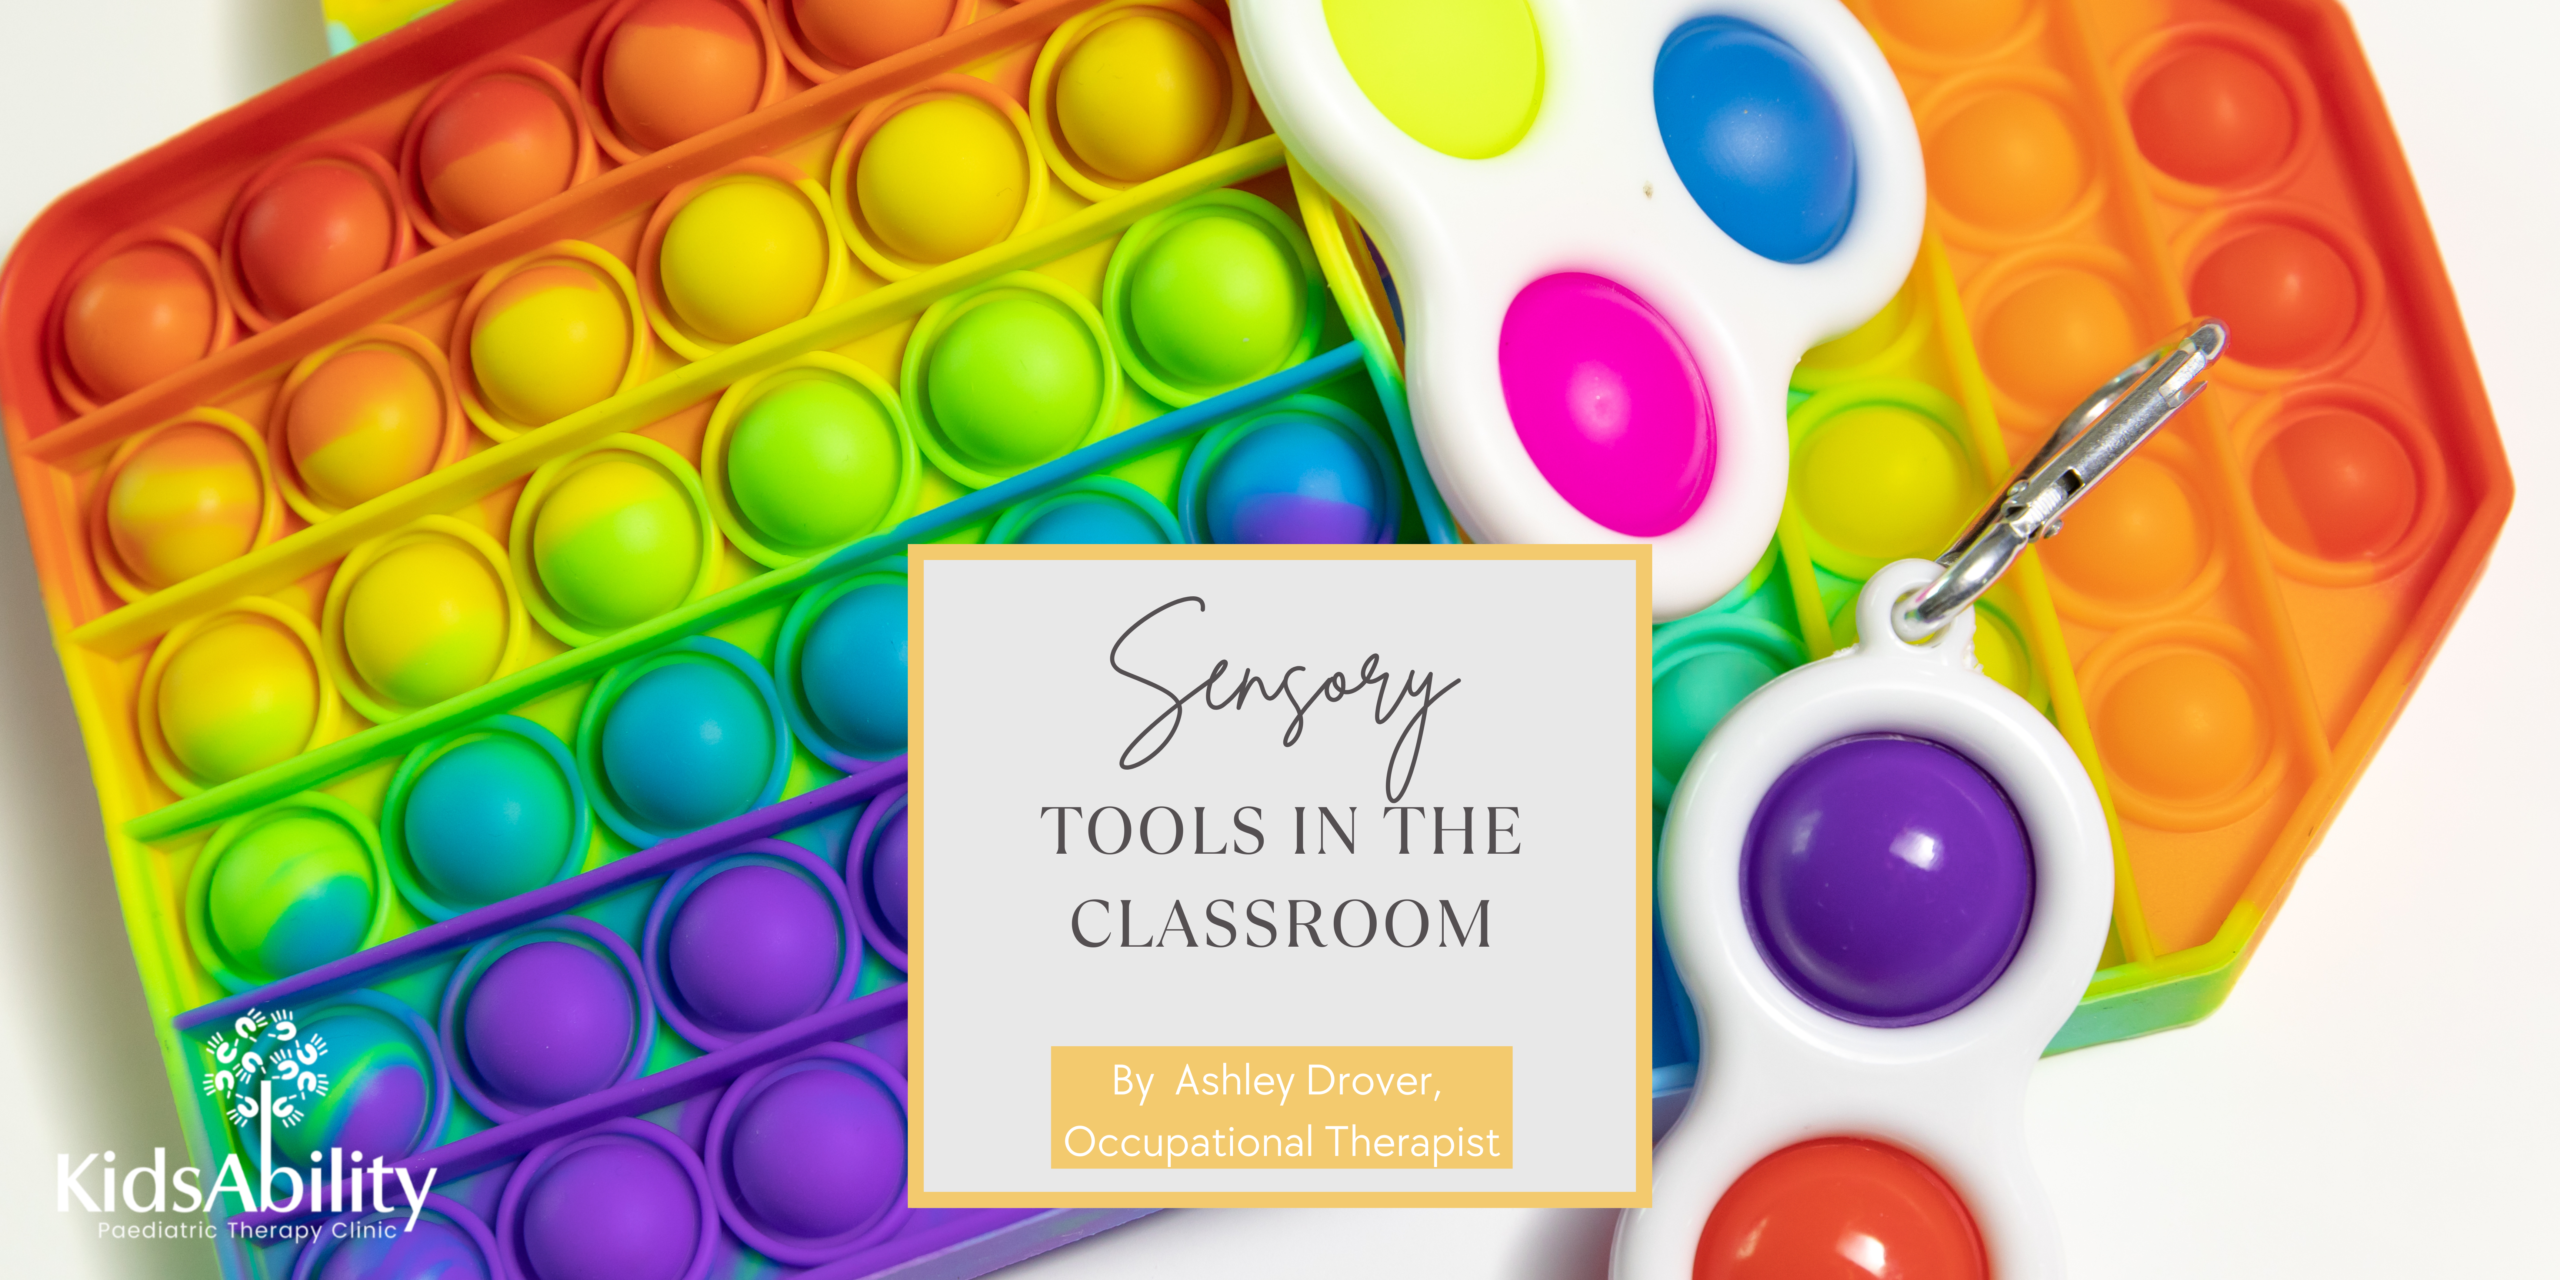 SENSORY TOOLS FOR THE CLASSROOM By Ashley Drover, Occupational Therapist